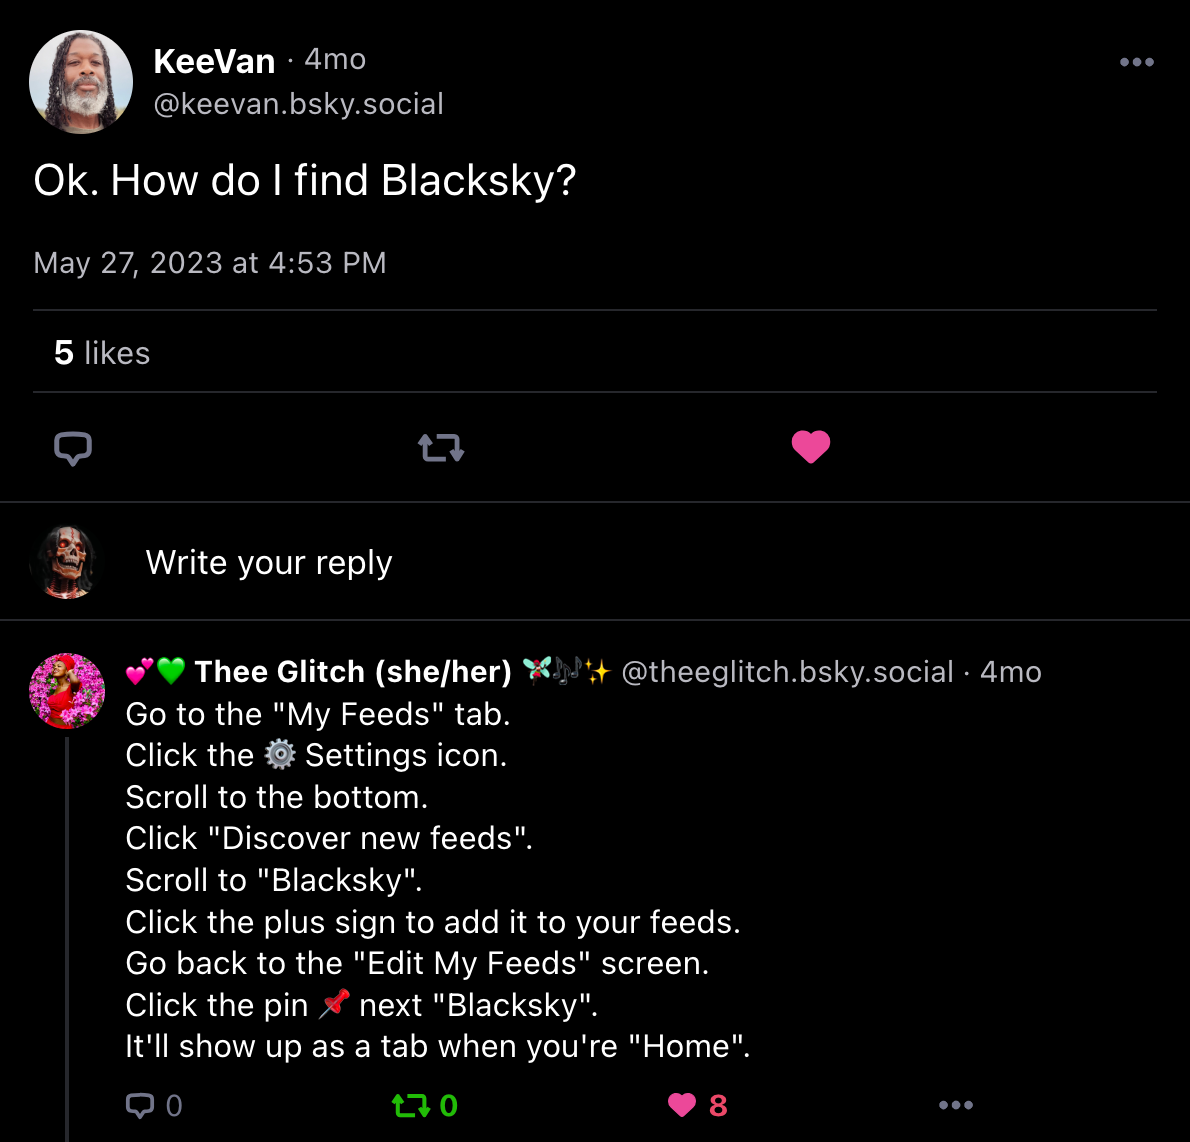 Post from @keevan.bsky.social on May 27, 2023 at 4:53 PM saying "Ok. How do I find Blacksky" with a detailed reply from @theeglitch.bsky.social on how to do so.